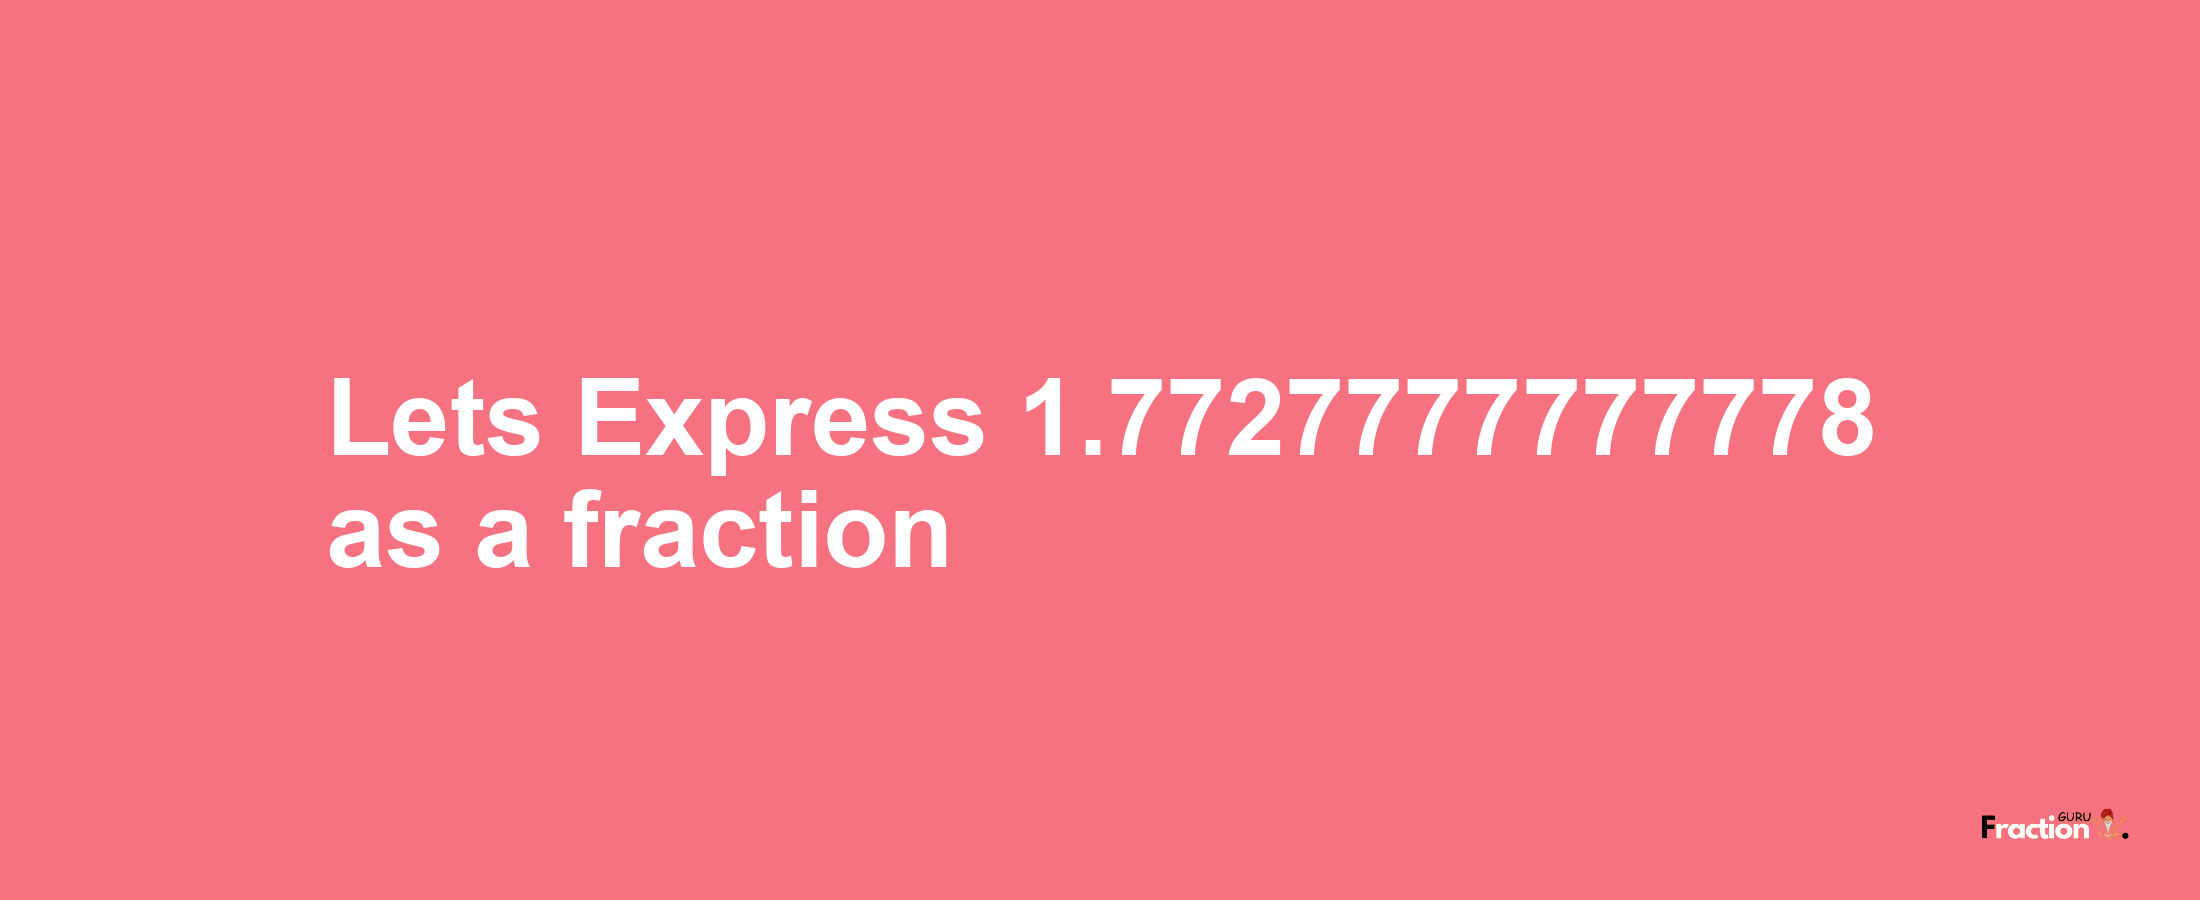 Lets Express 1.7727777777778 as afraction